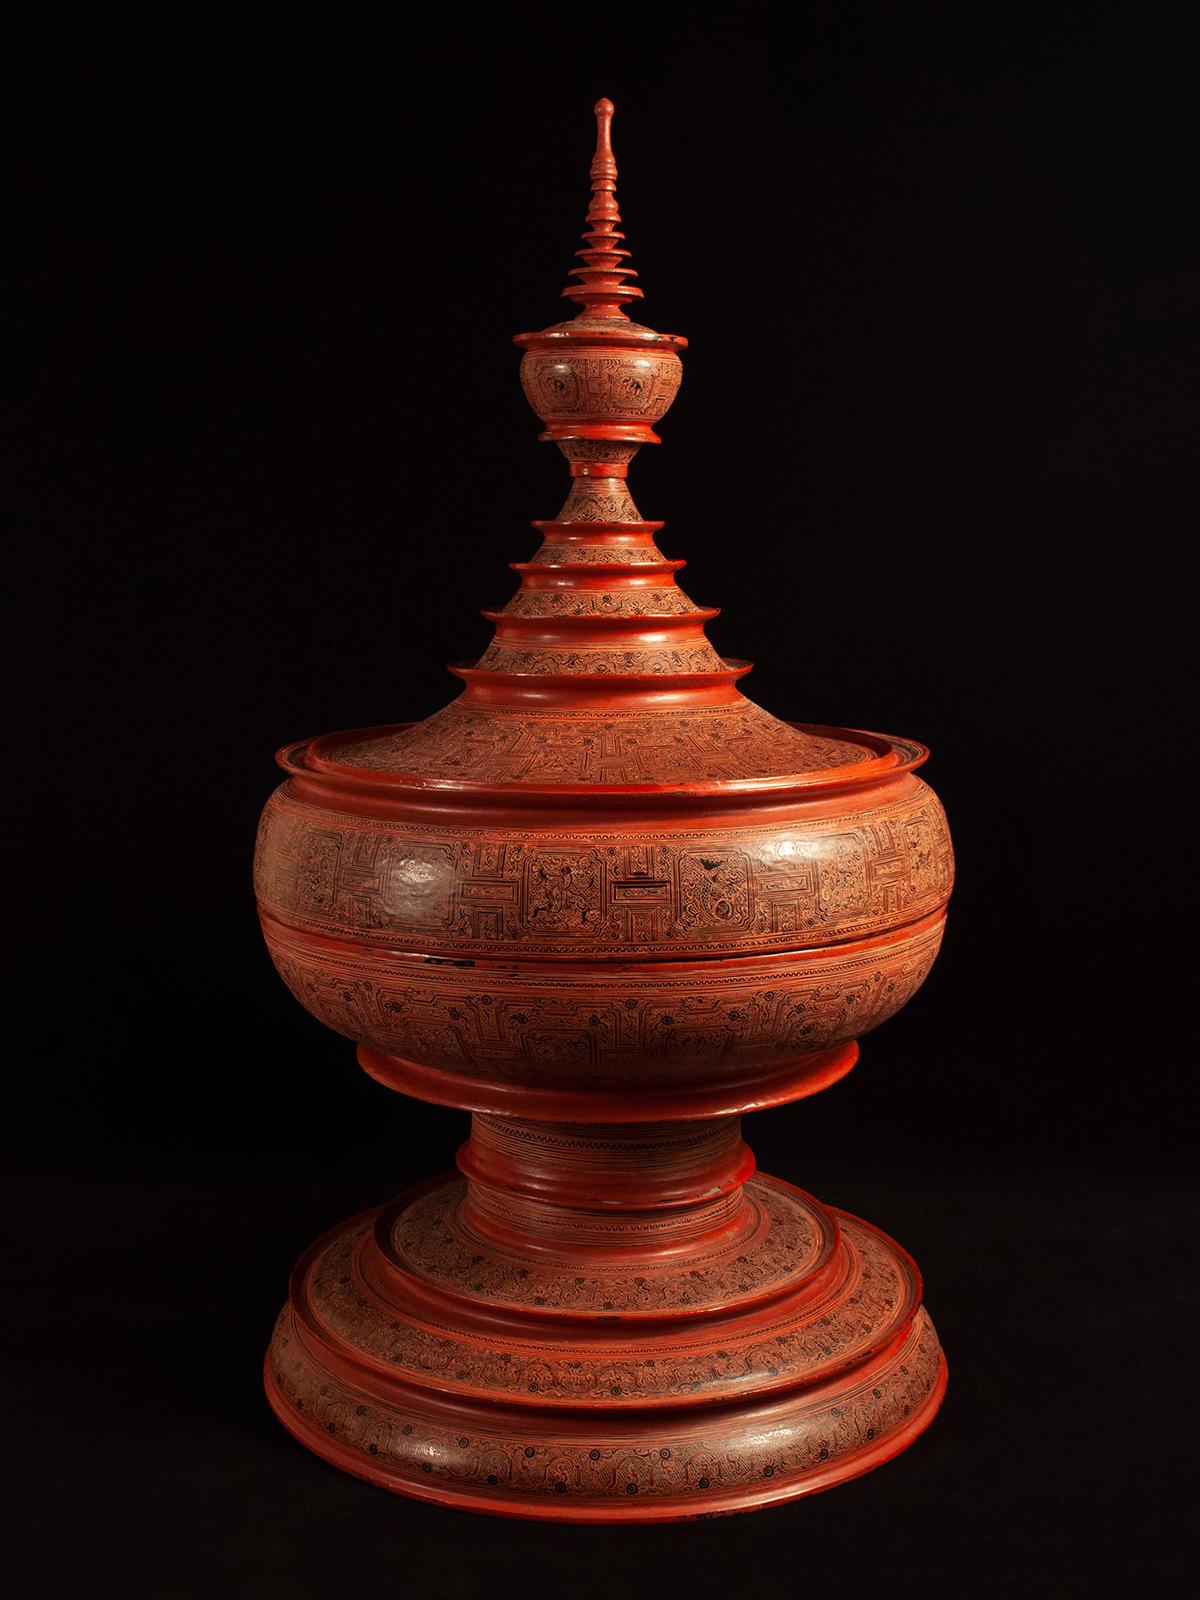 Burmese Early 20th Century Lacquer and Bamboo Offering Vessel, Hsun Ok, Pagan, Burma